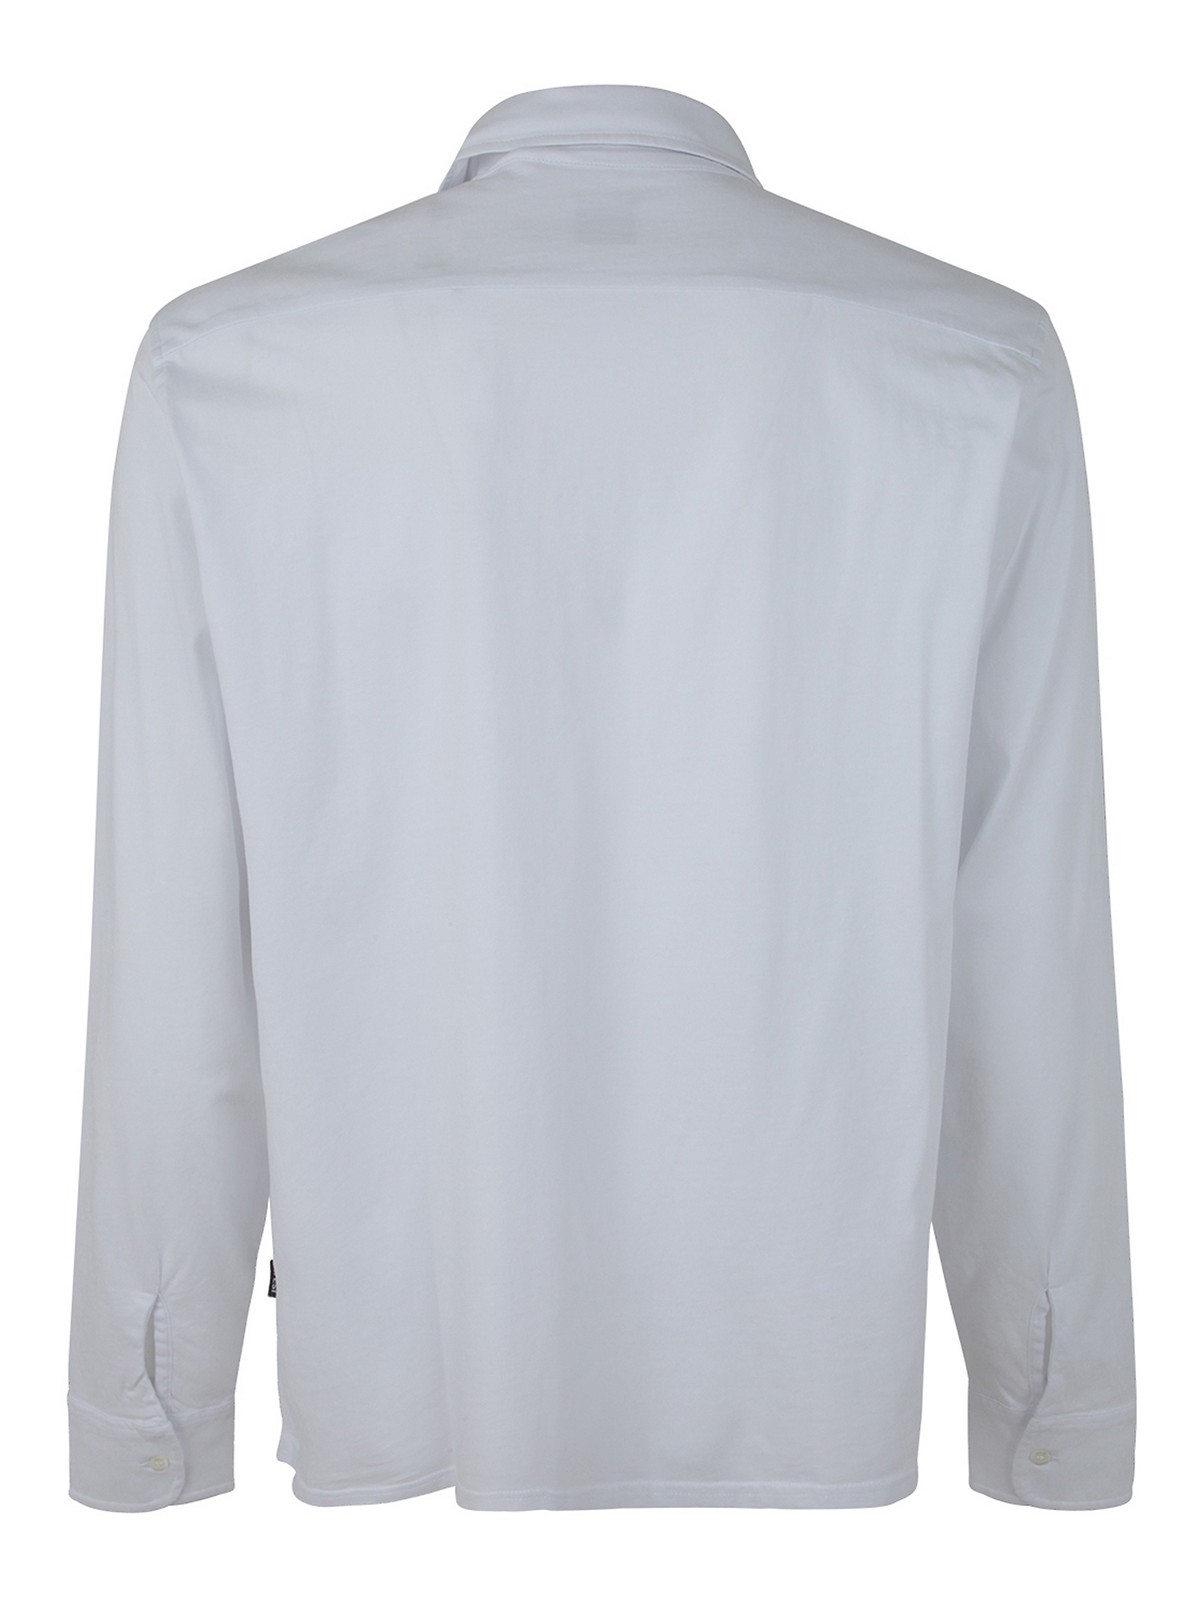 Shop Aspesi Cotton Shirt With Chest Pocket In White